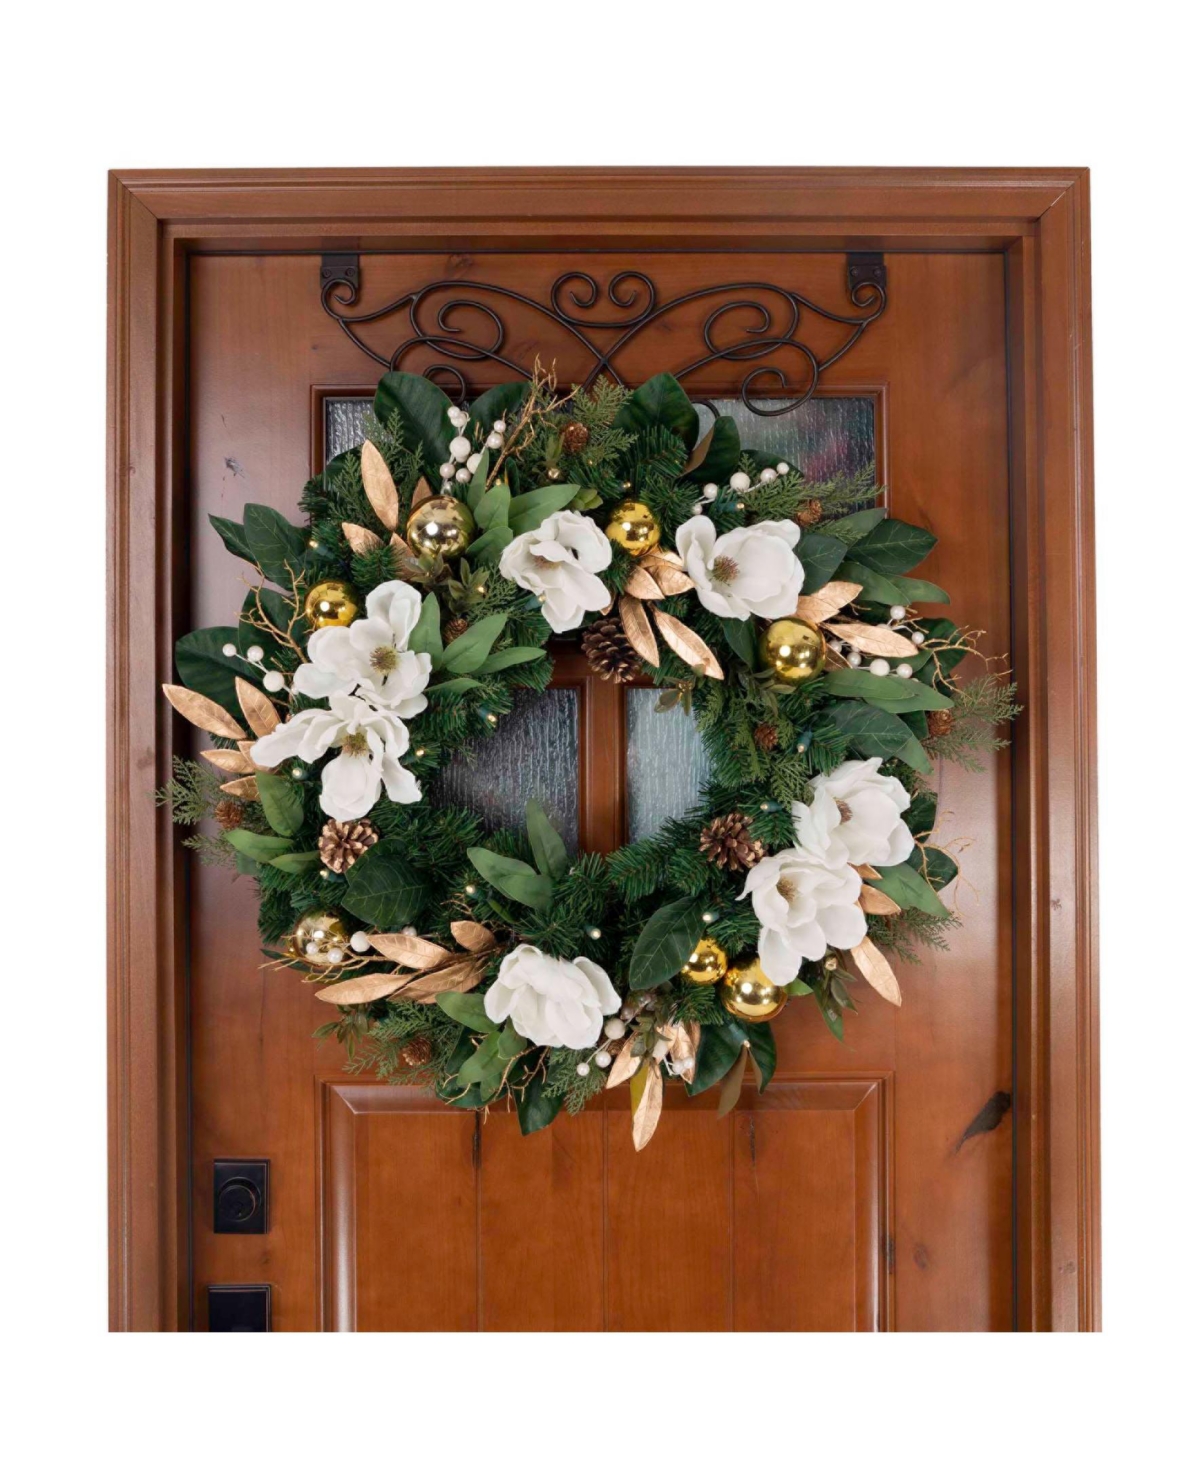 Shop Village Lighting Company 30" Lighted Christmas Wreath, White Gold-tone Magnolia In Assorted